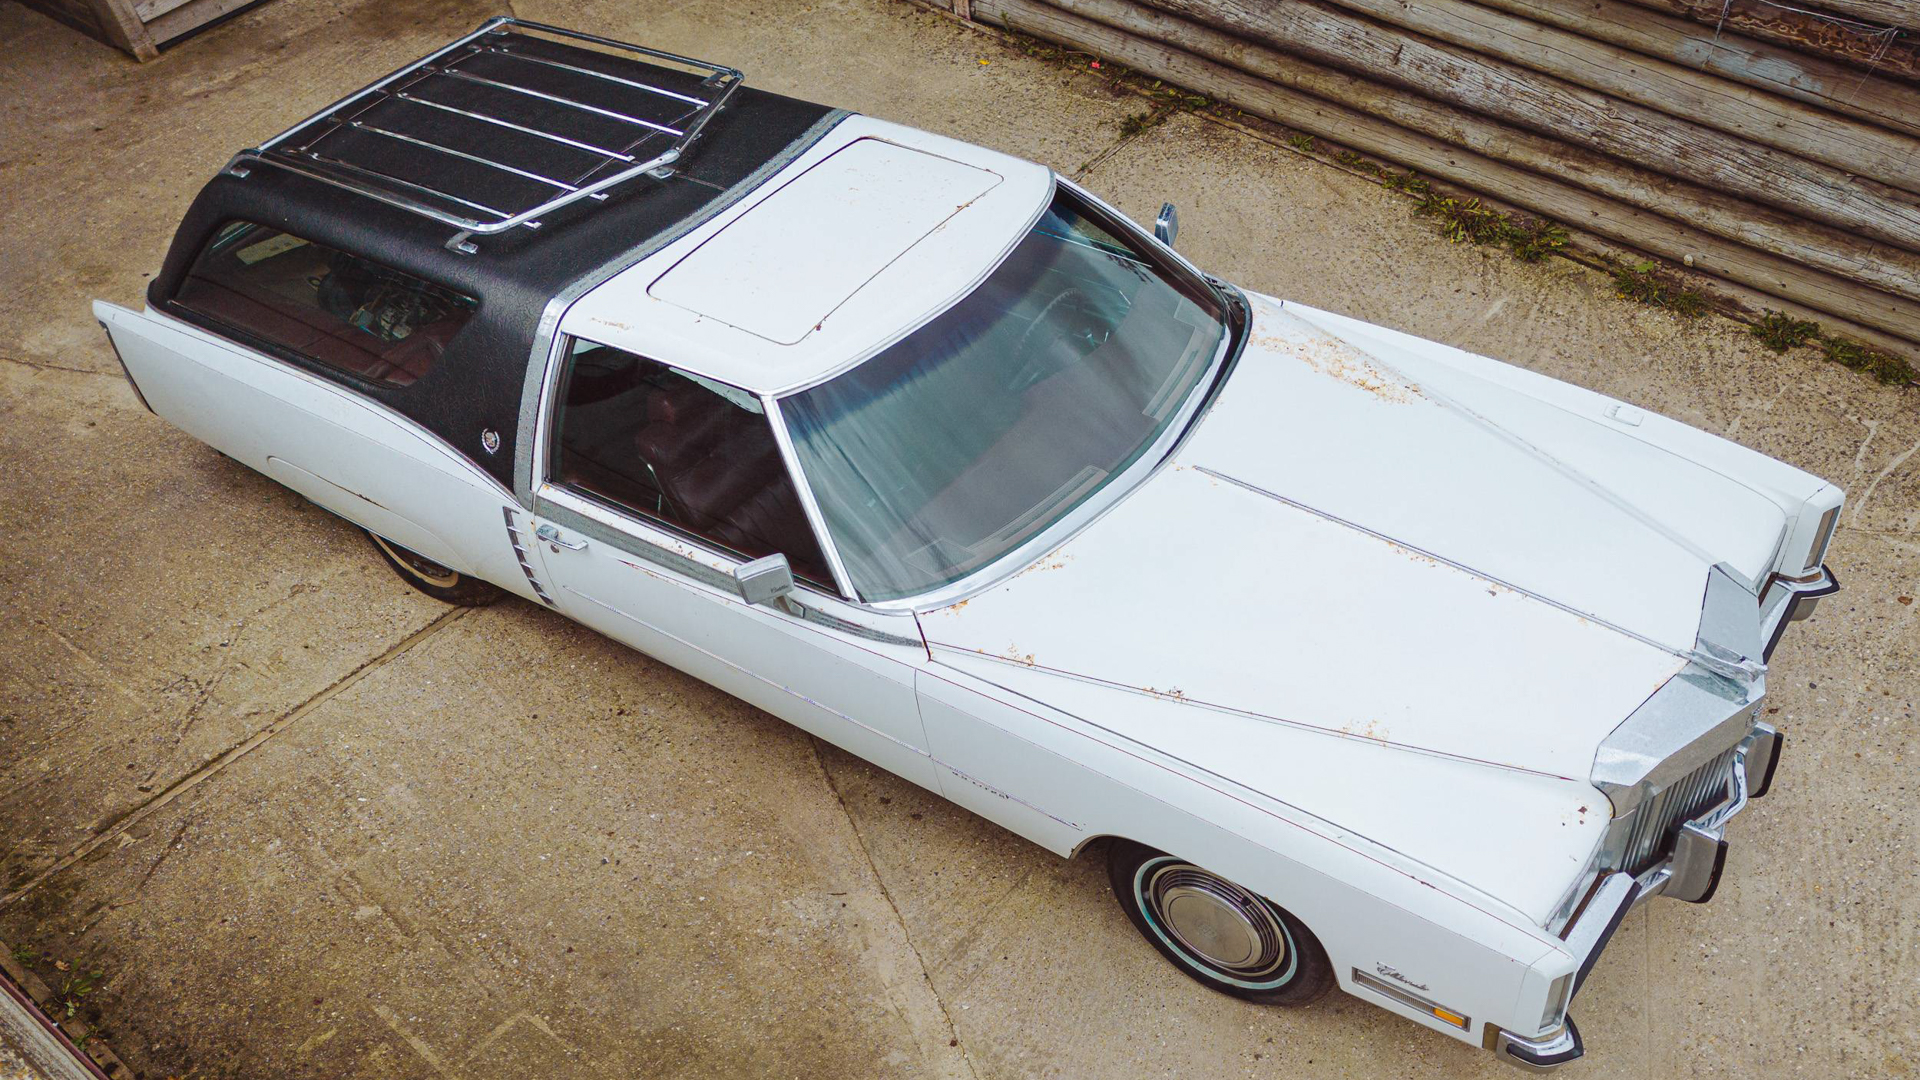 Rare 1972 Cadillac Eldorado Is a Coachbuilt Two-Door Station Wagon With a Past